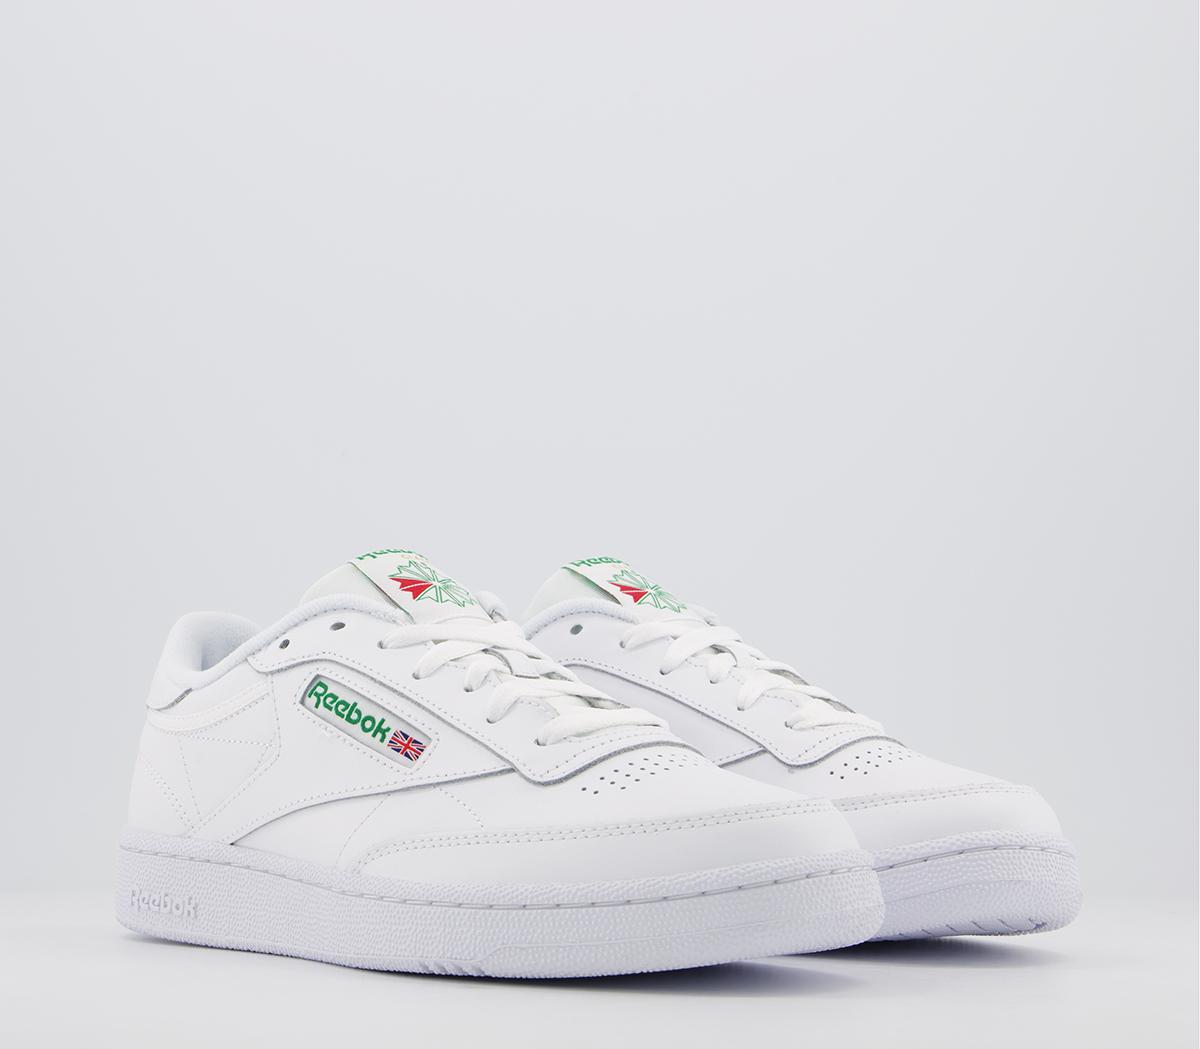 Reebok Club C 85 In White And Green, 9